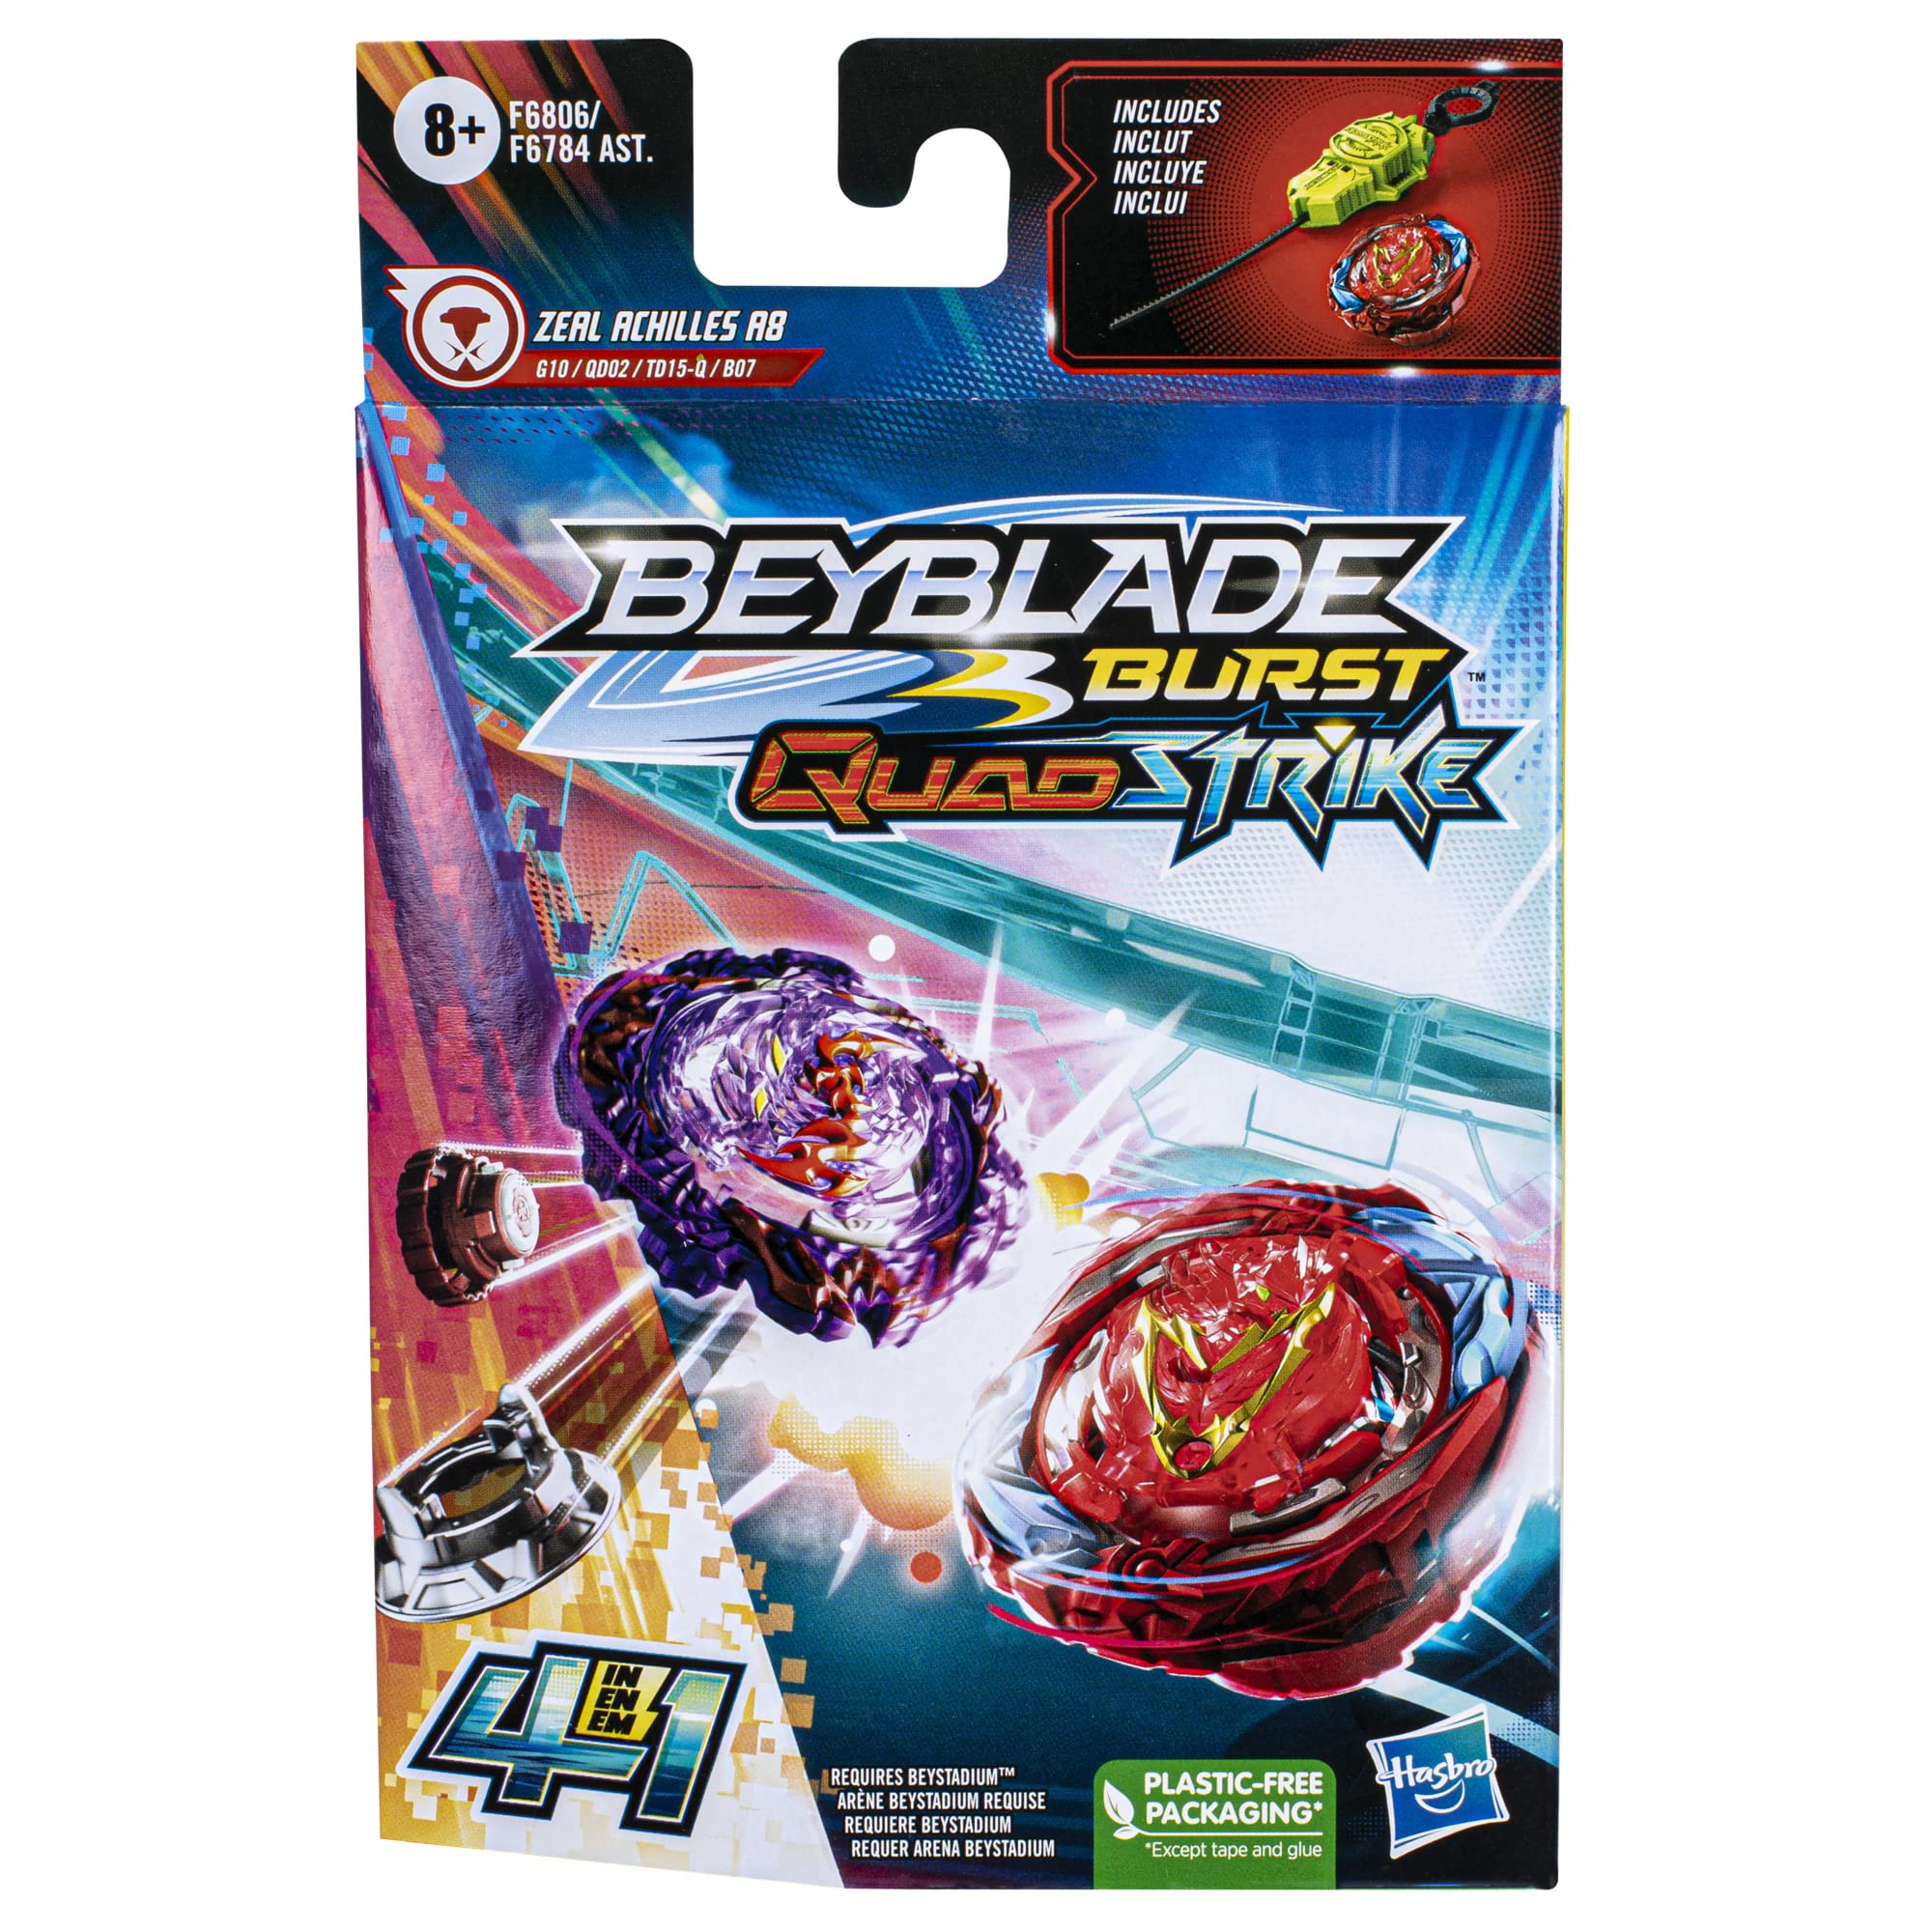 Beyblade Burst QuadStrike Zeal Achilles A8 Spinning Top Starter Pack, Balance/Defense Type Battling Game with Launcher, Kids Toy Set